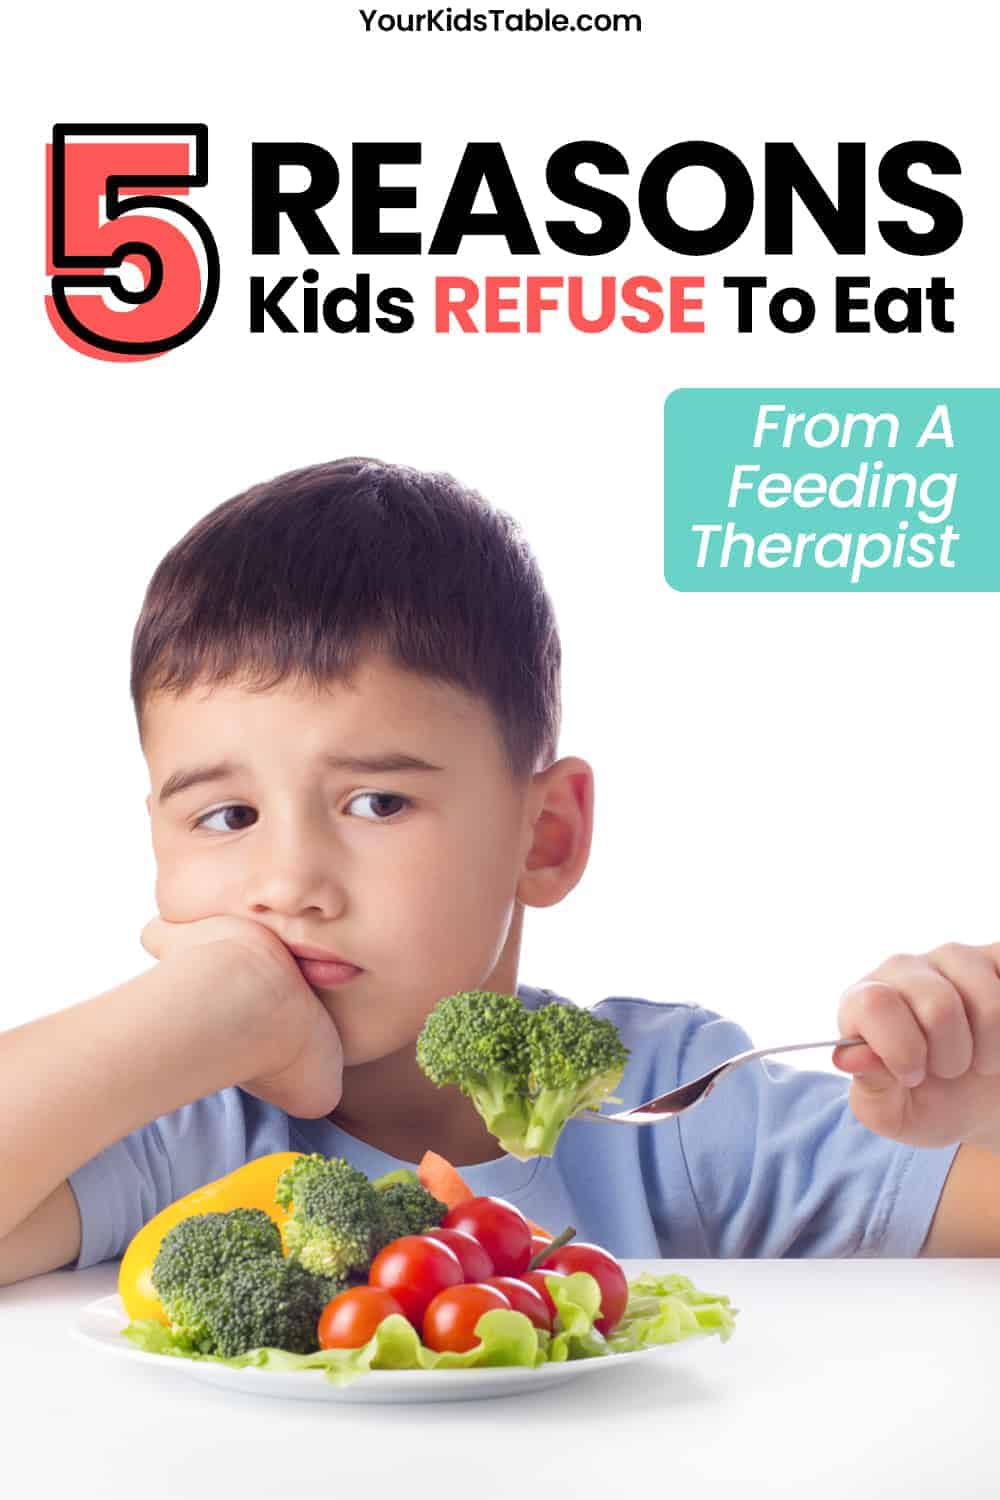 Feel like you’re banging your head against the wall trying to figure out why your child won’t eat anything or refuses to eat at all? There are real reasons and ways you can help picky eater kids. Learn how from a feeding expert and mom.